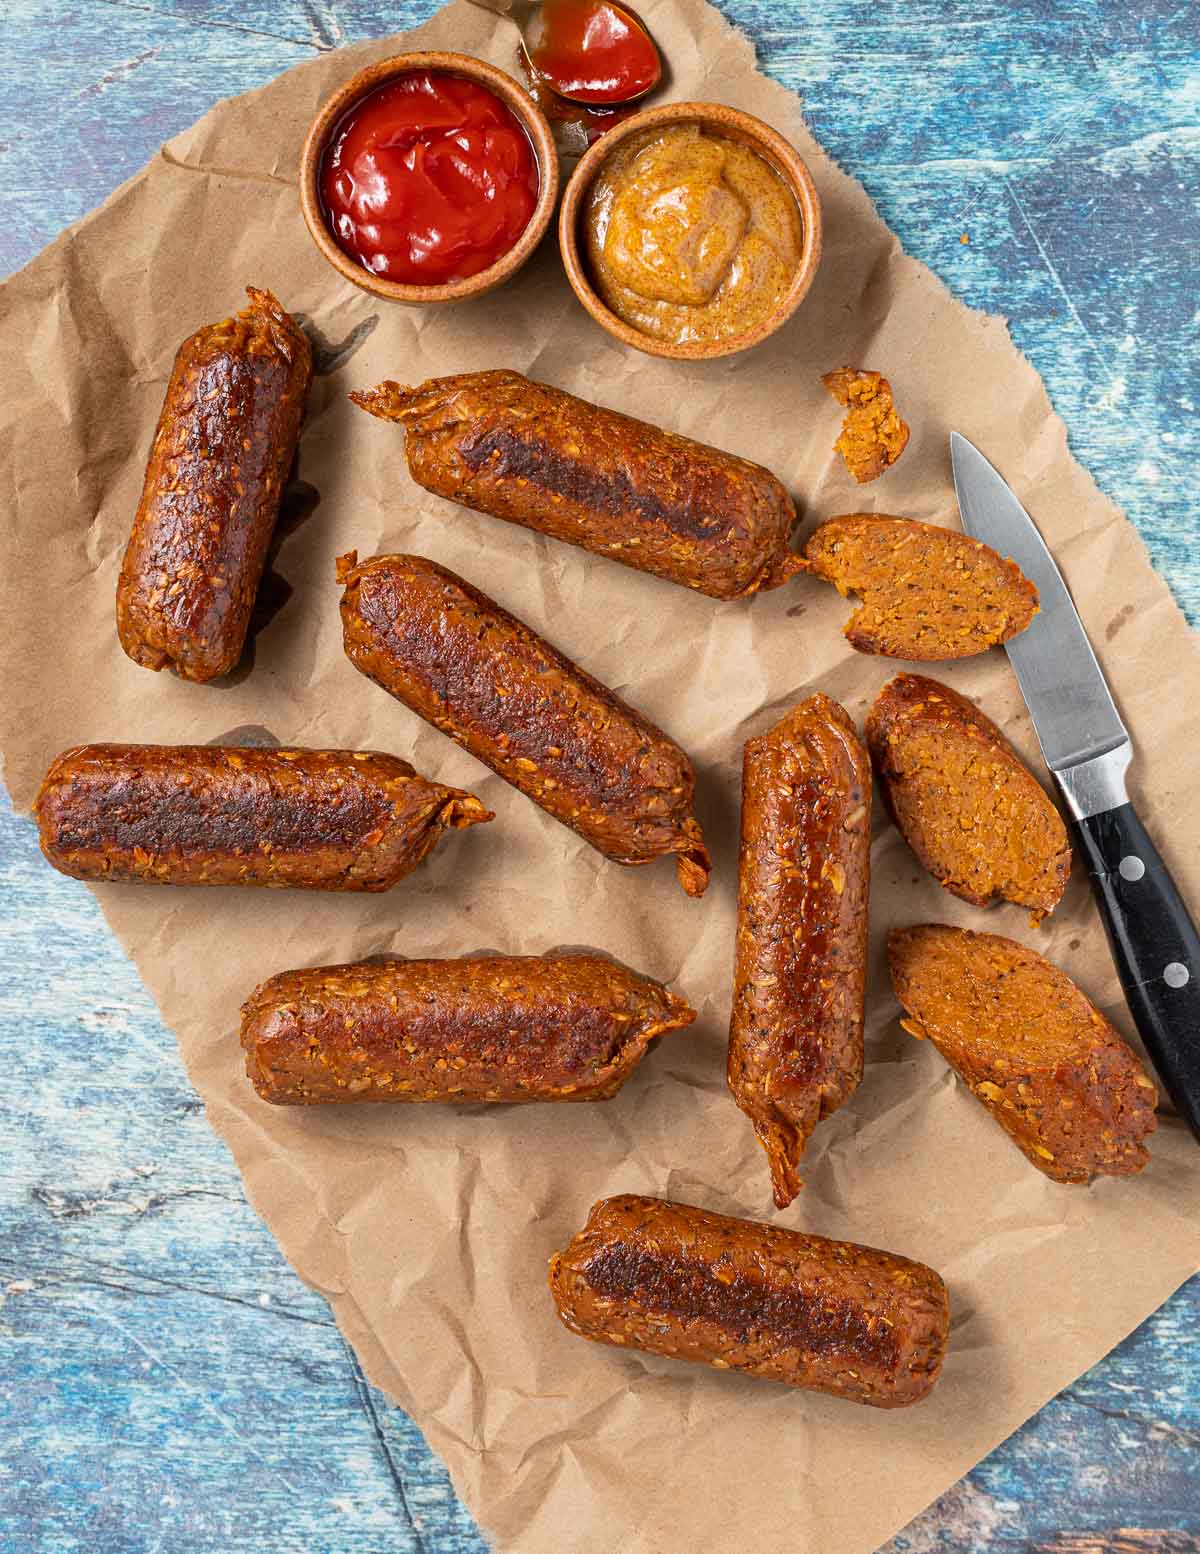 vegan sausages with ketchup and mustard on brown paper